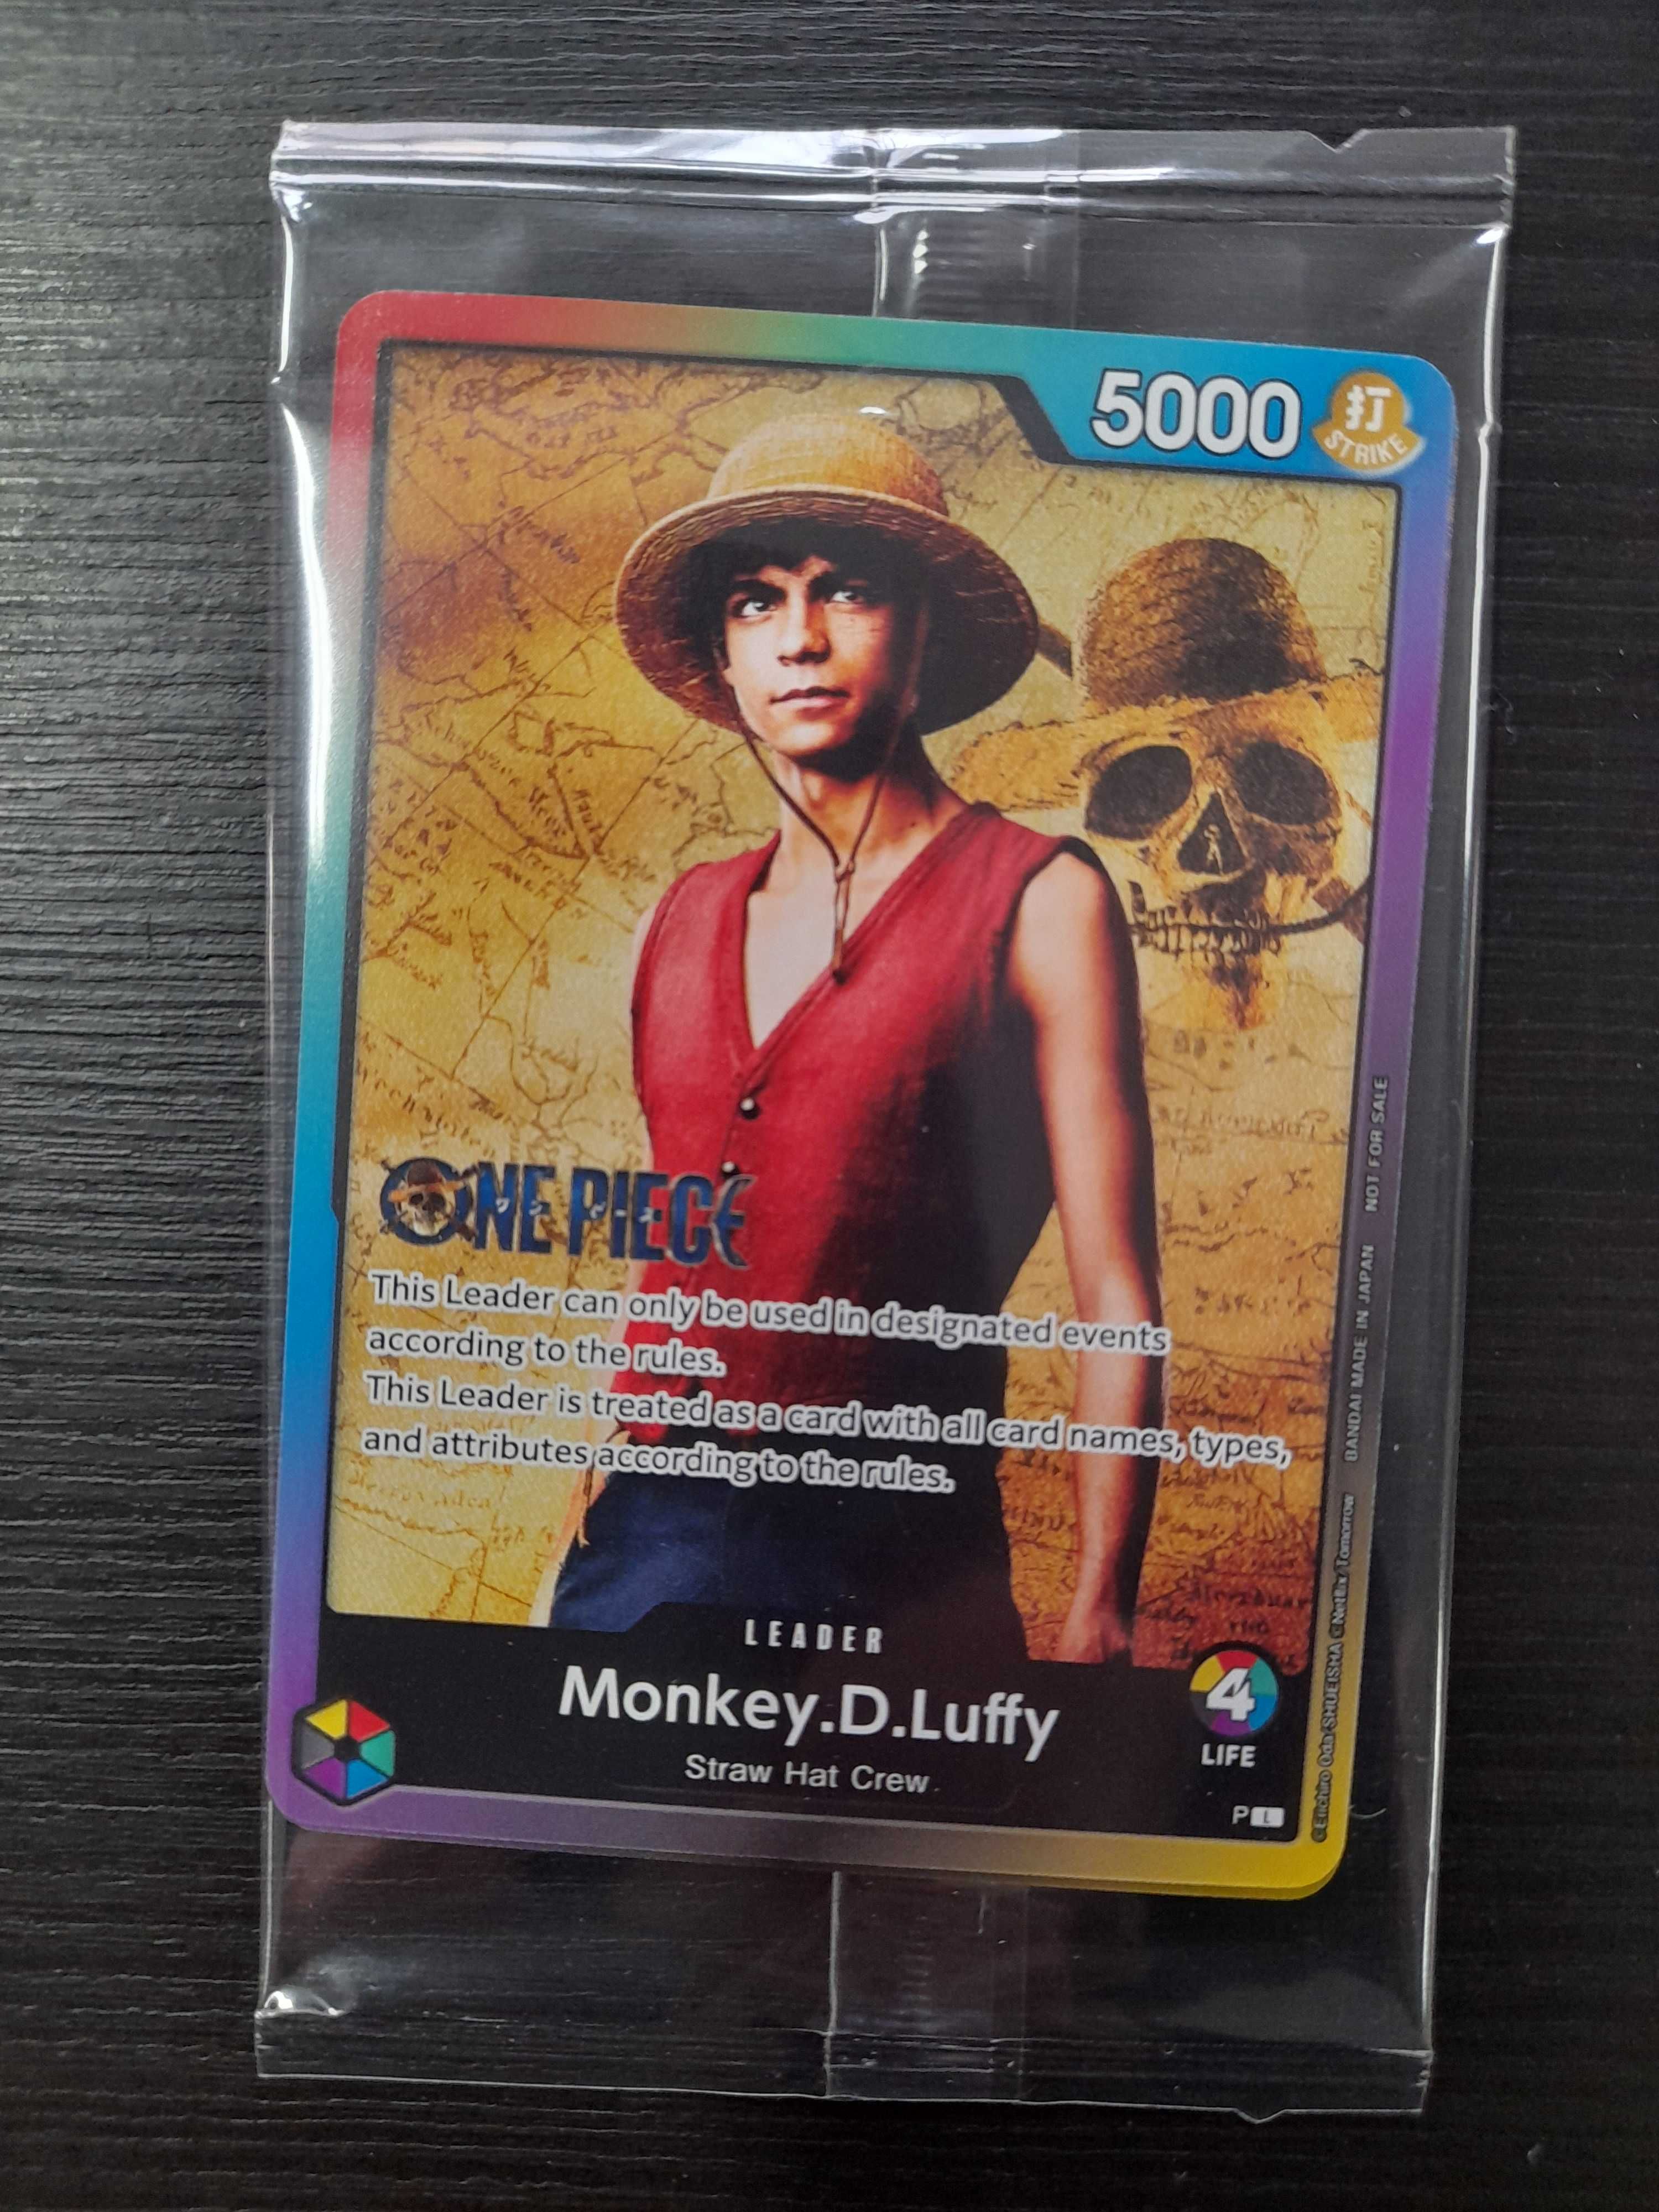 One piece card game Monkey.D.Luffy 2 promo cards